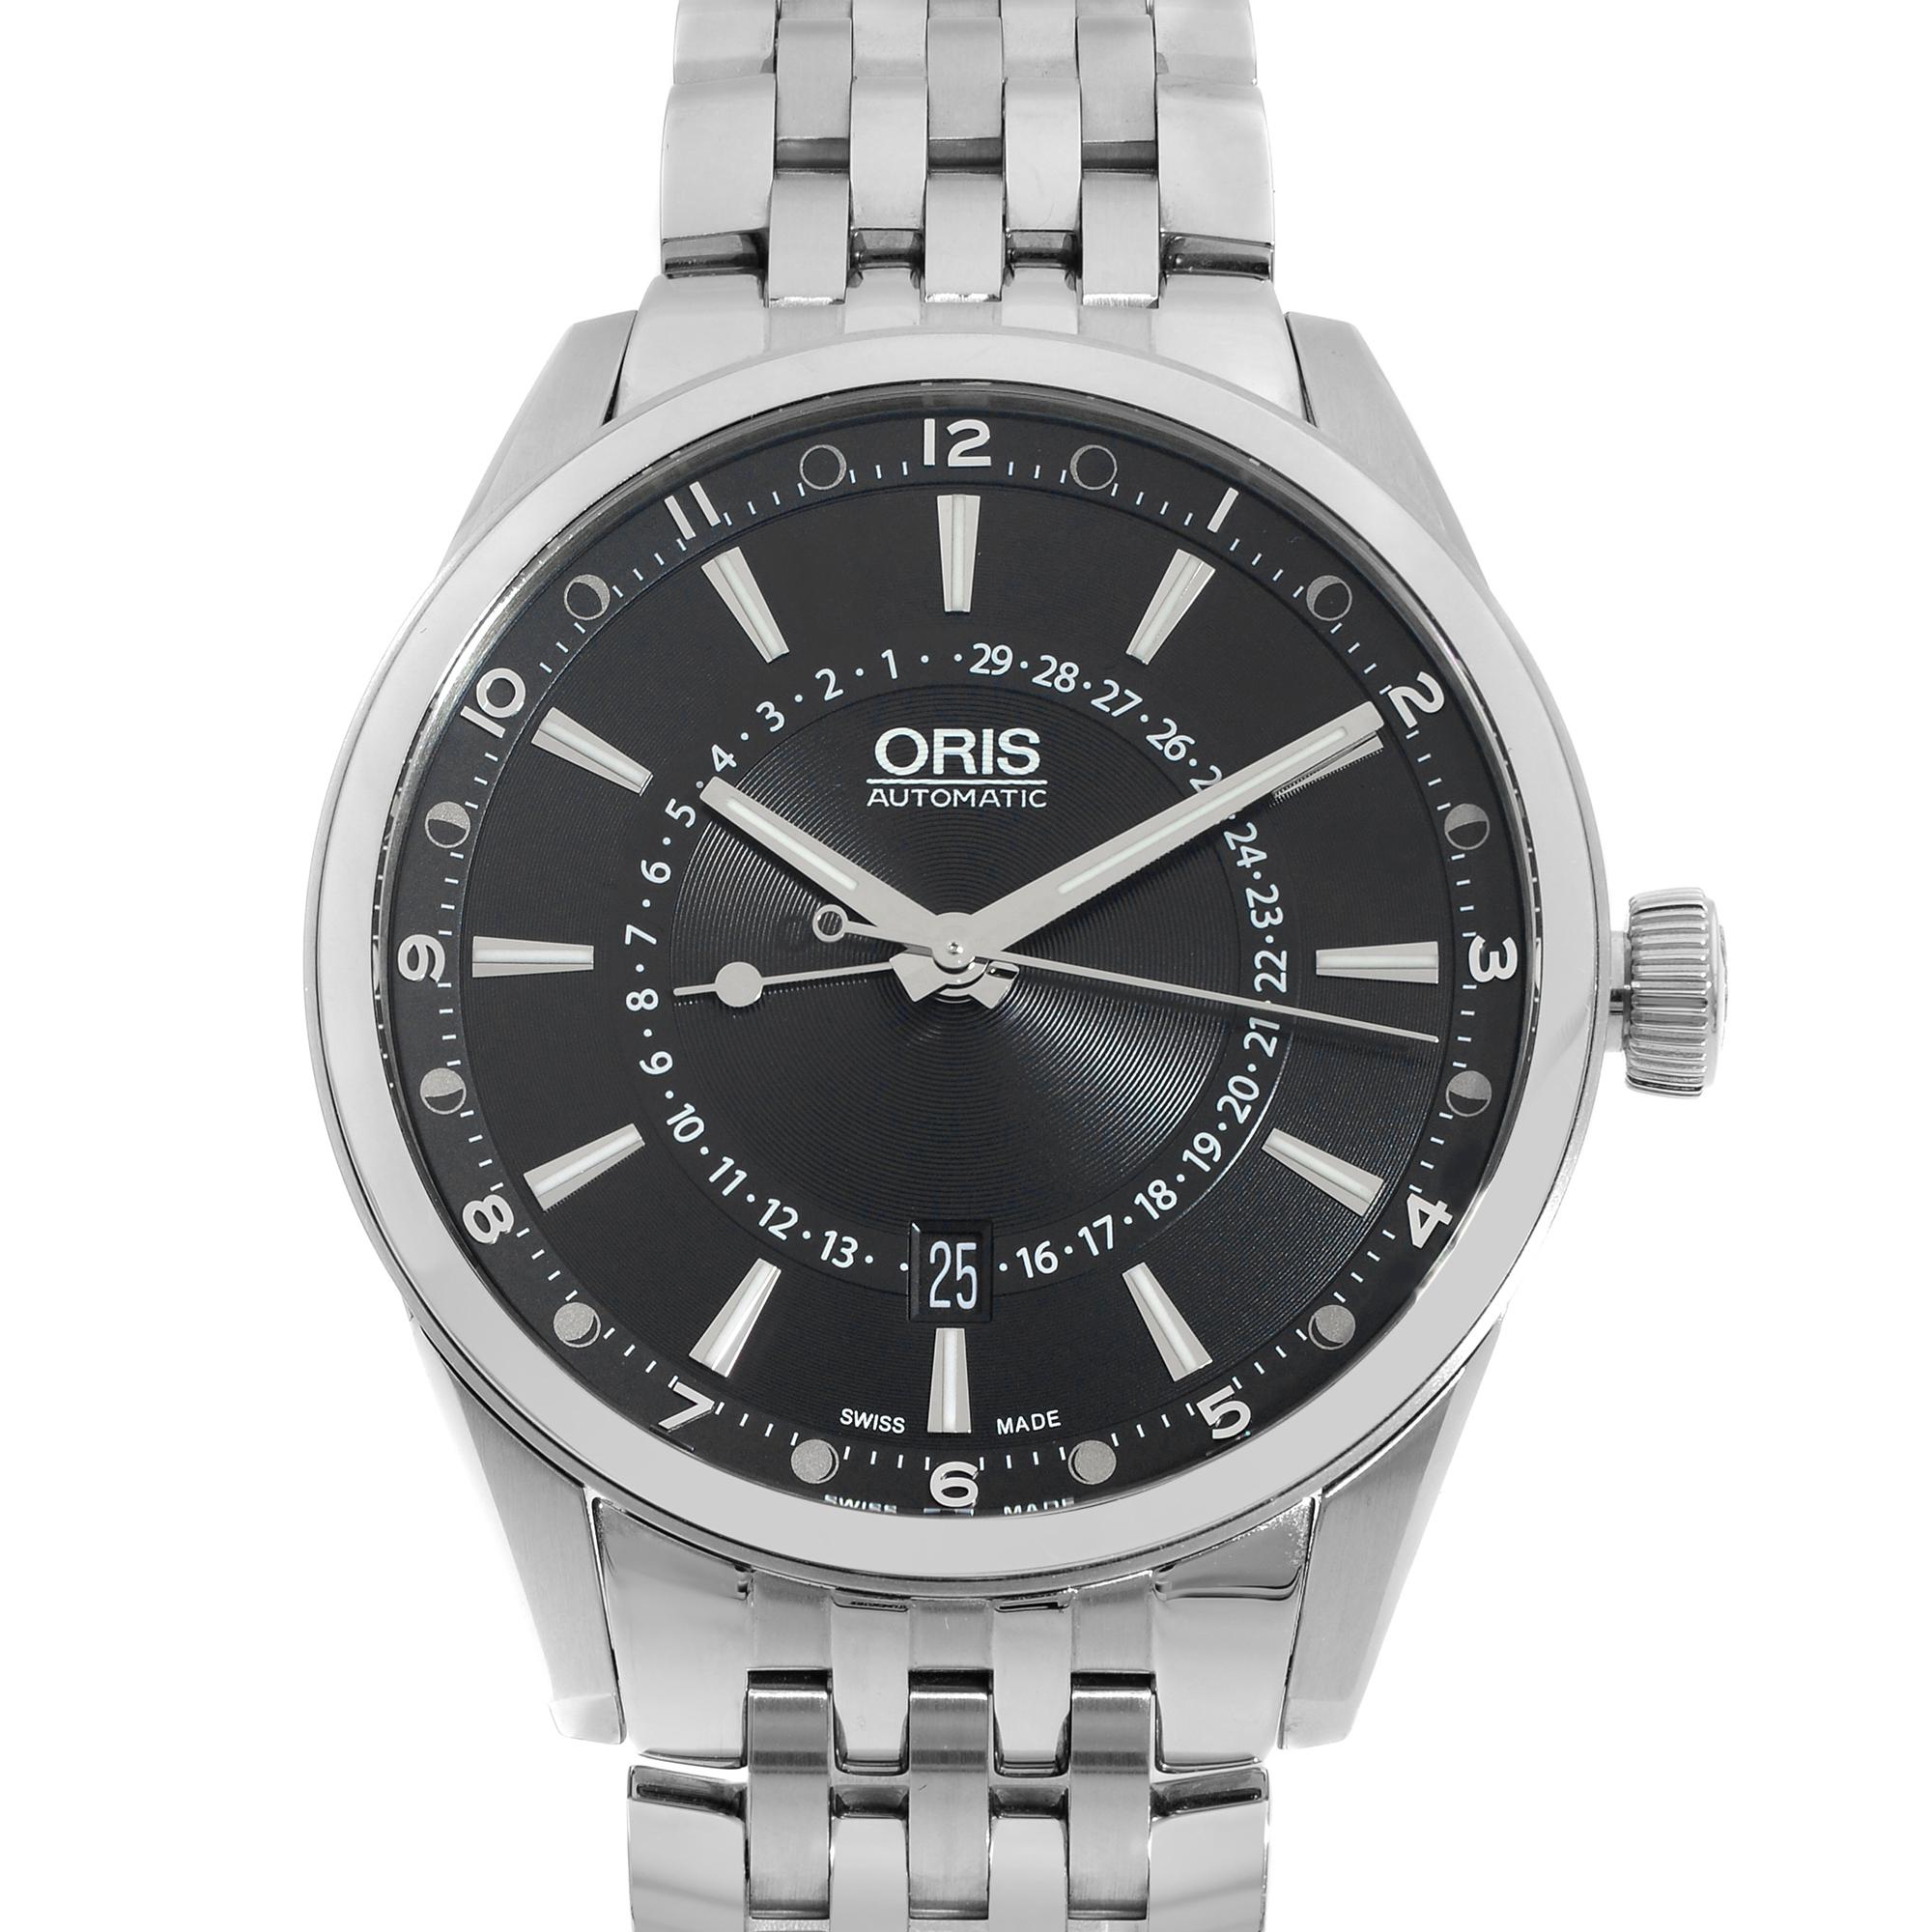 This display model Oris Artix 01 761 7691 4054-07 8 21 80 is a beautiful men's timepiece that is powered by mechanical (automatic) movement which is cased in a stainless steel case. It has a round shape face, date indicator, moon phase dial and has